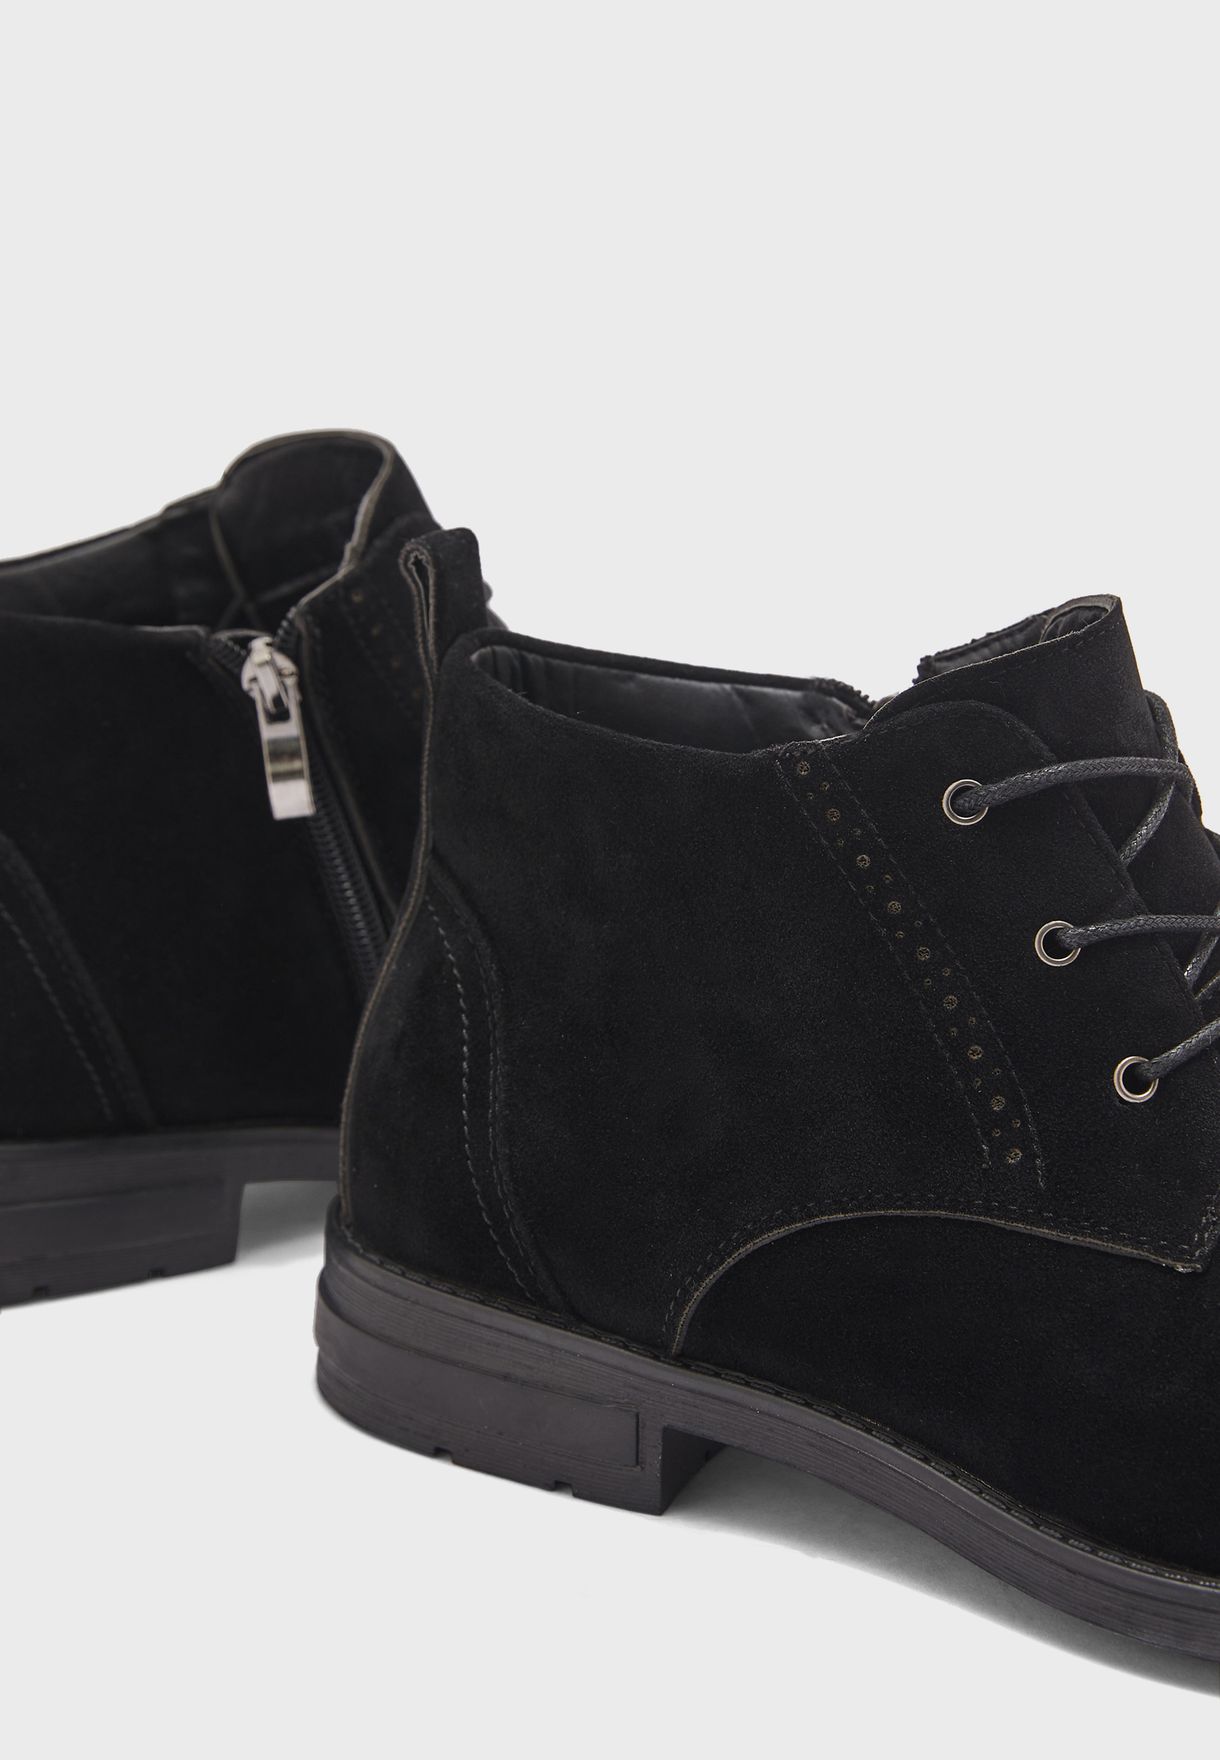 Casual Welted Chukka Boots